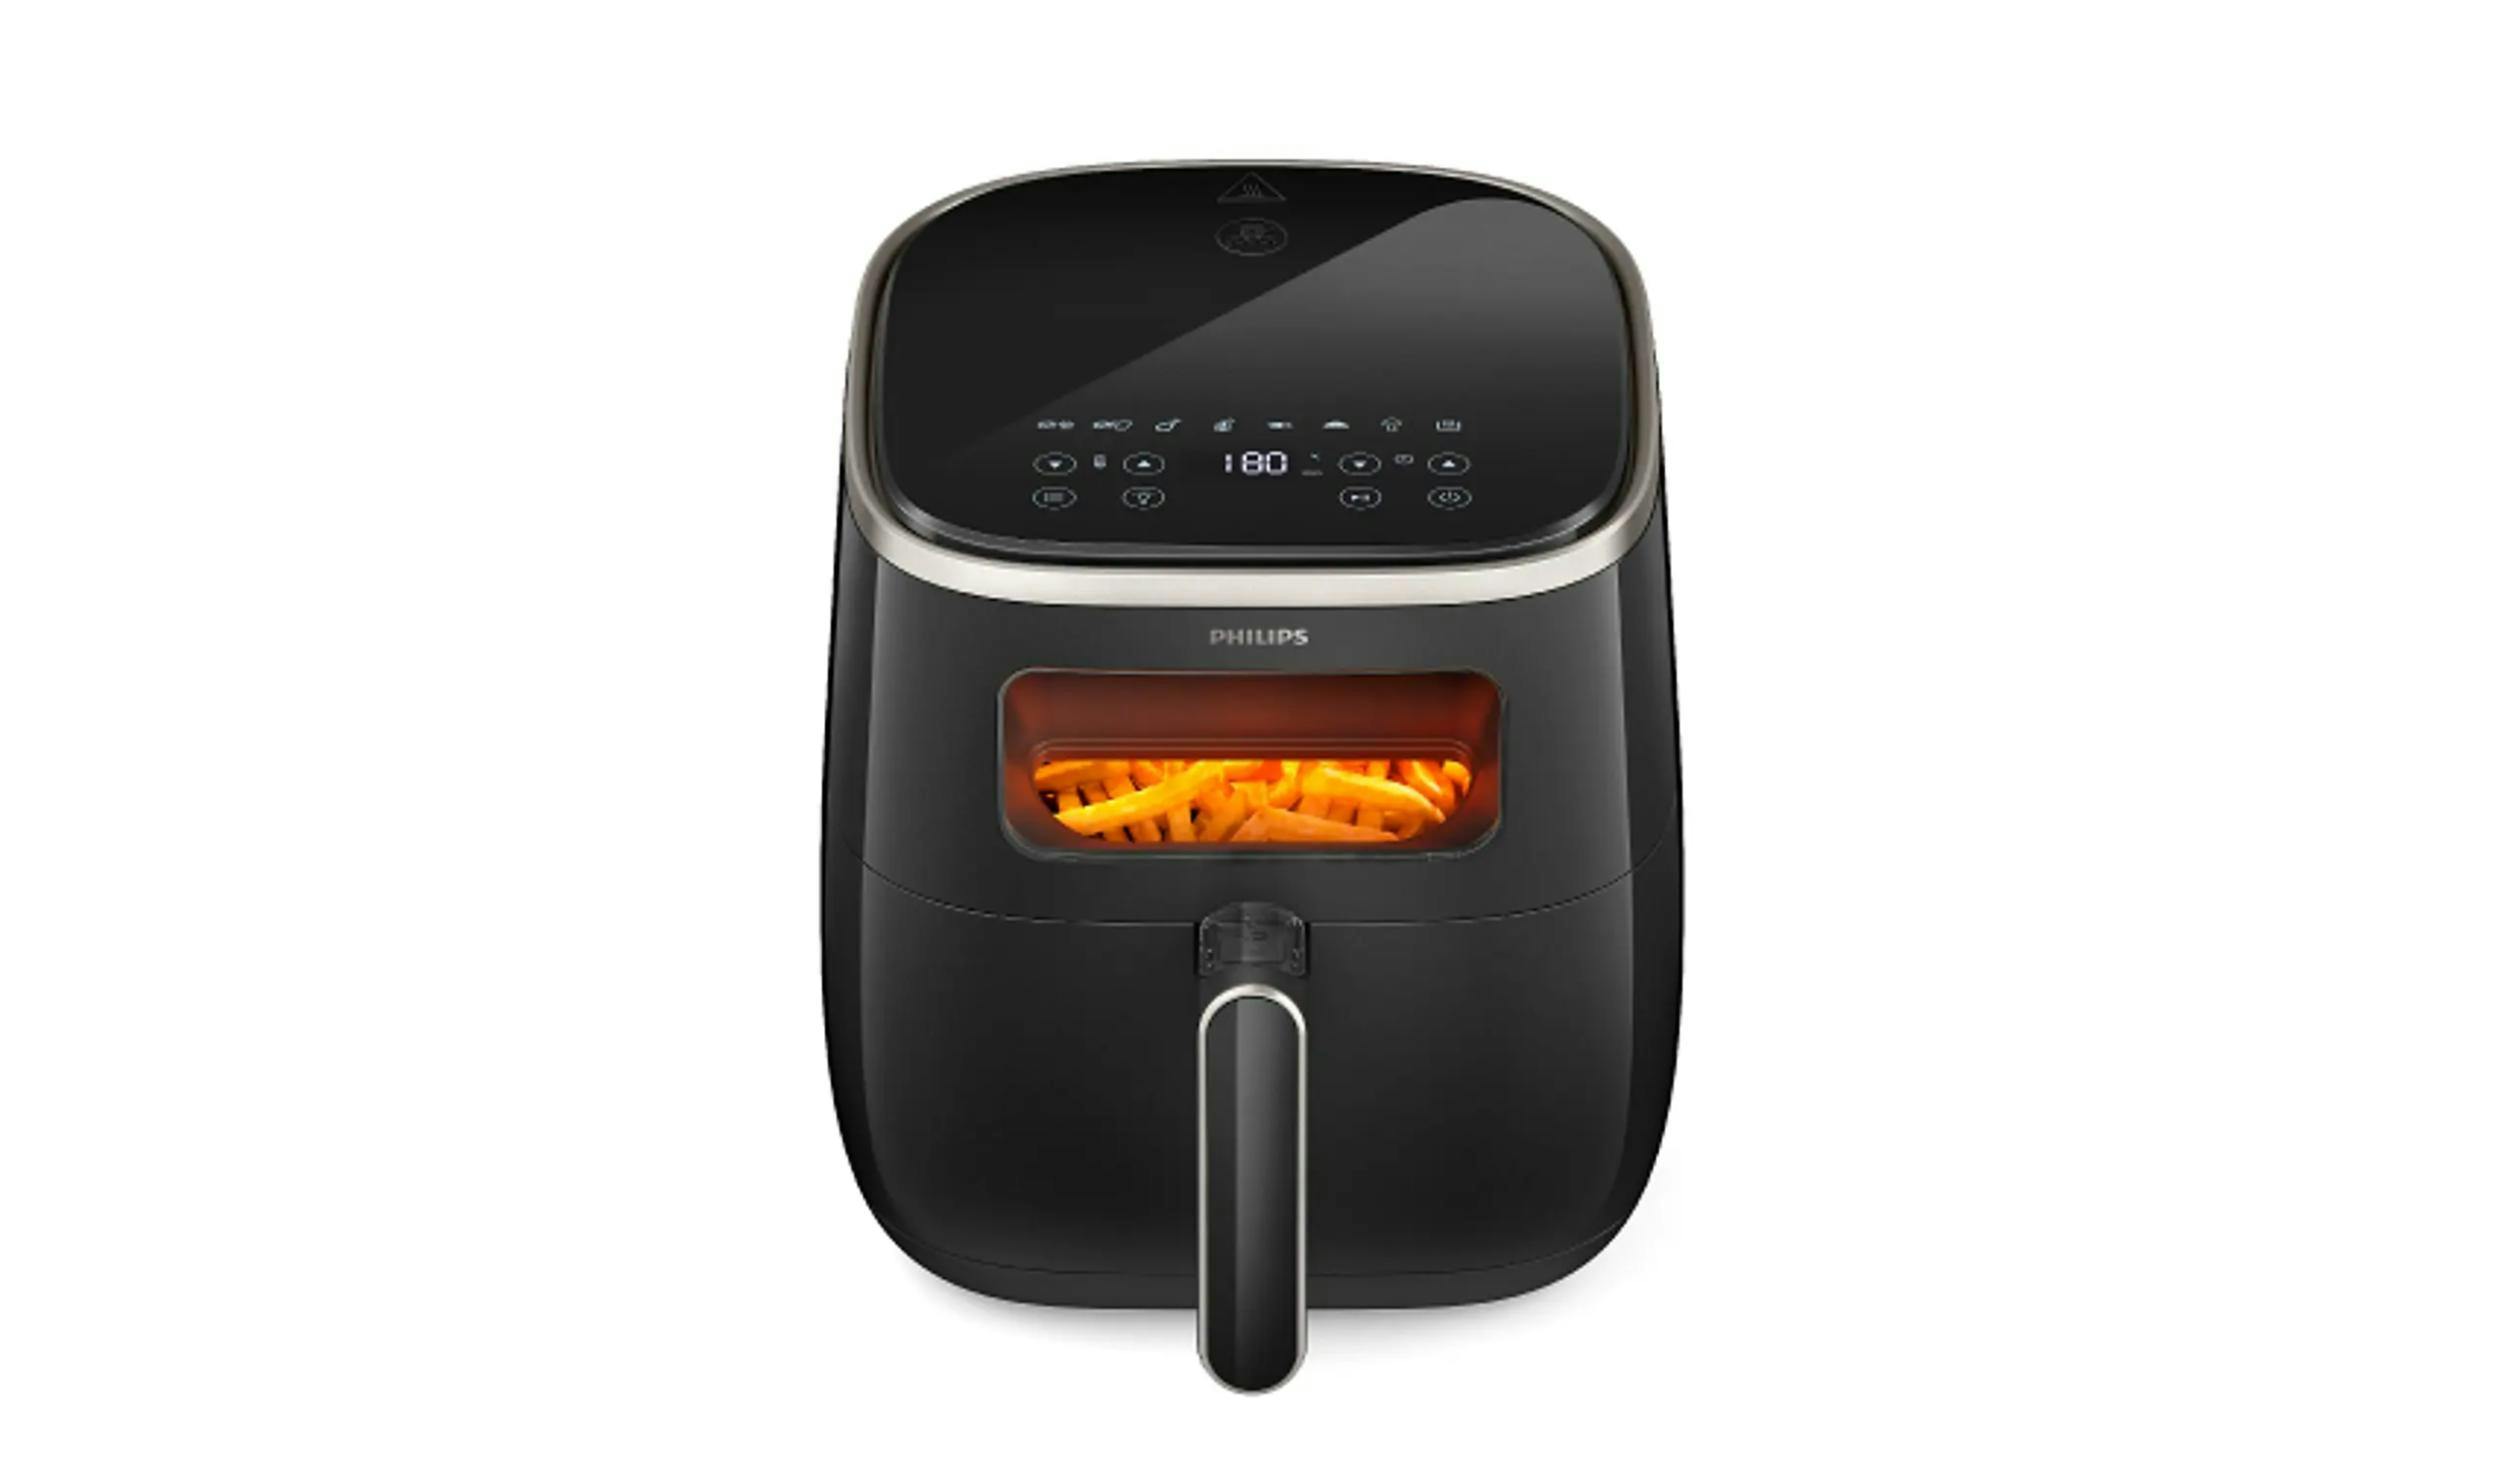 https://hnsgsfp.imgix.net/9/images/detailed/96/philips-airfryer-5.6l-with-digital-window-and-rapid-air-technology-black-hd9257-80_2.jpg?fit=fill&bg=0FFF&w=2500&h=1463&auto=format,compress